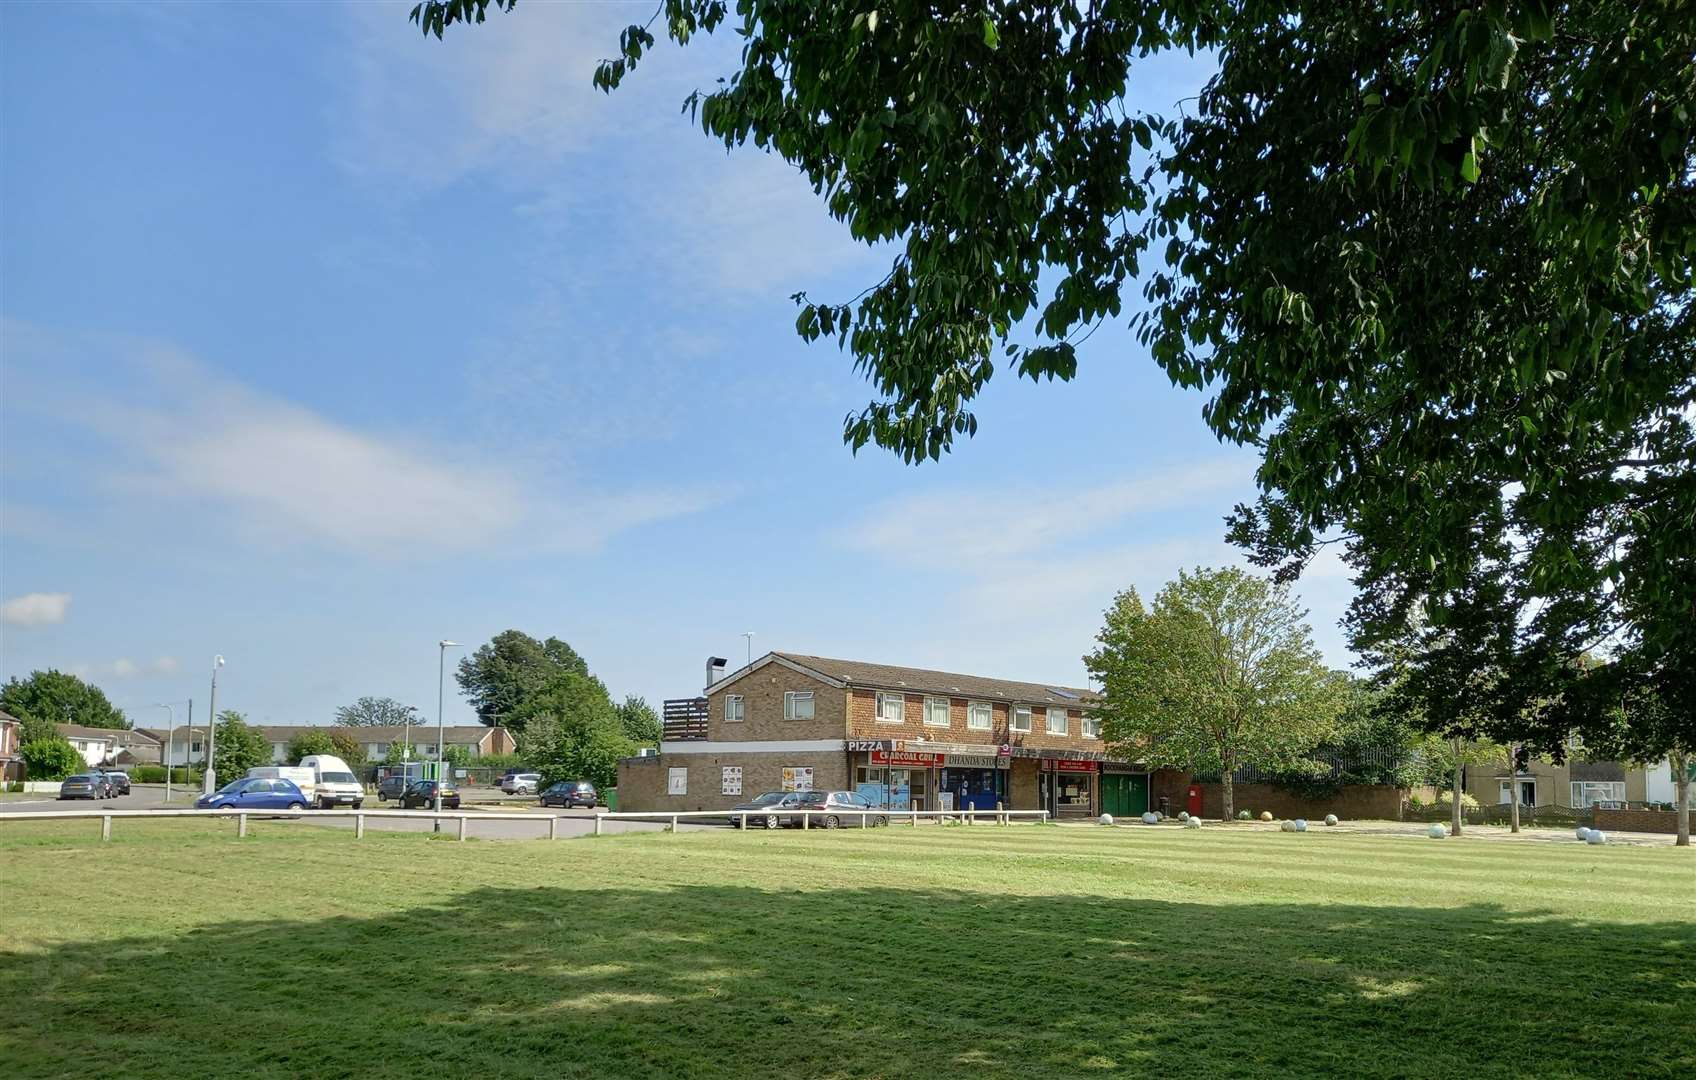 The site of the former Bockhanger Community Centre in Kennington. Picture: Ashford Borough Council